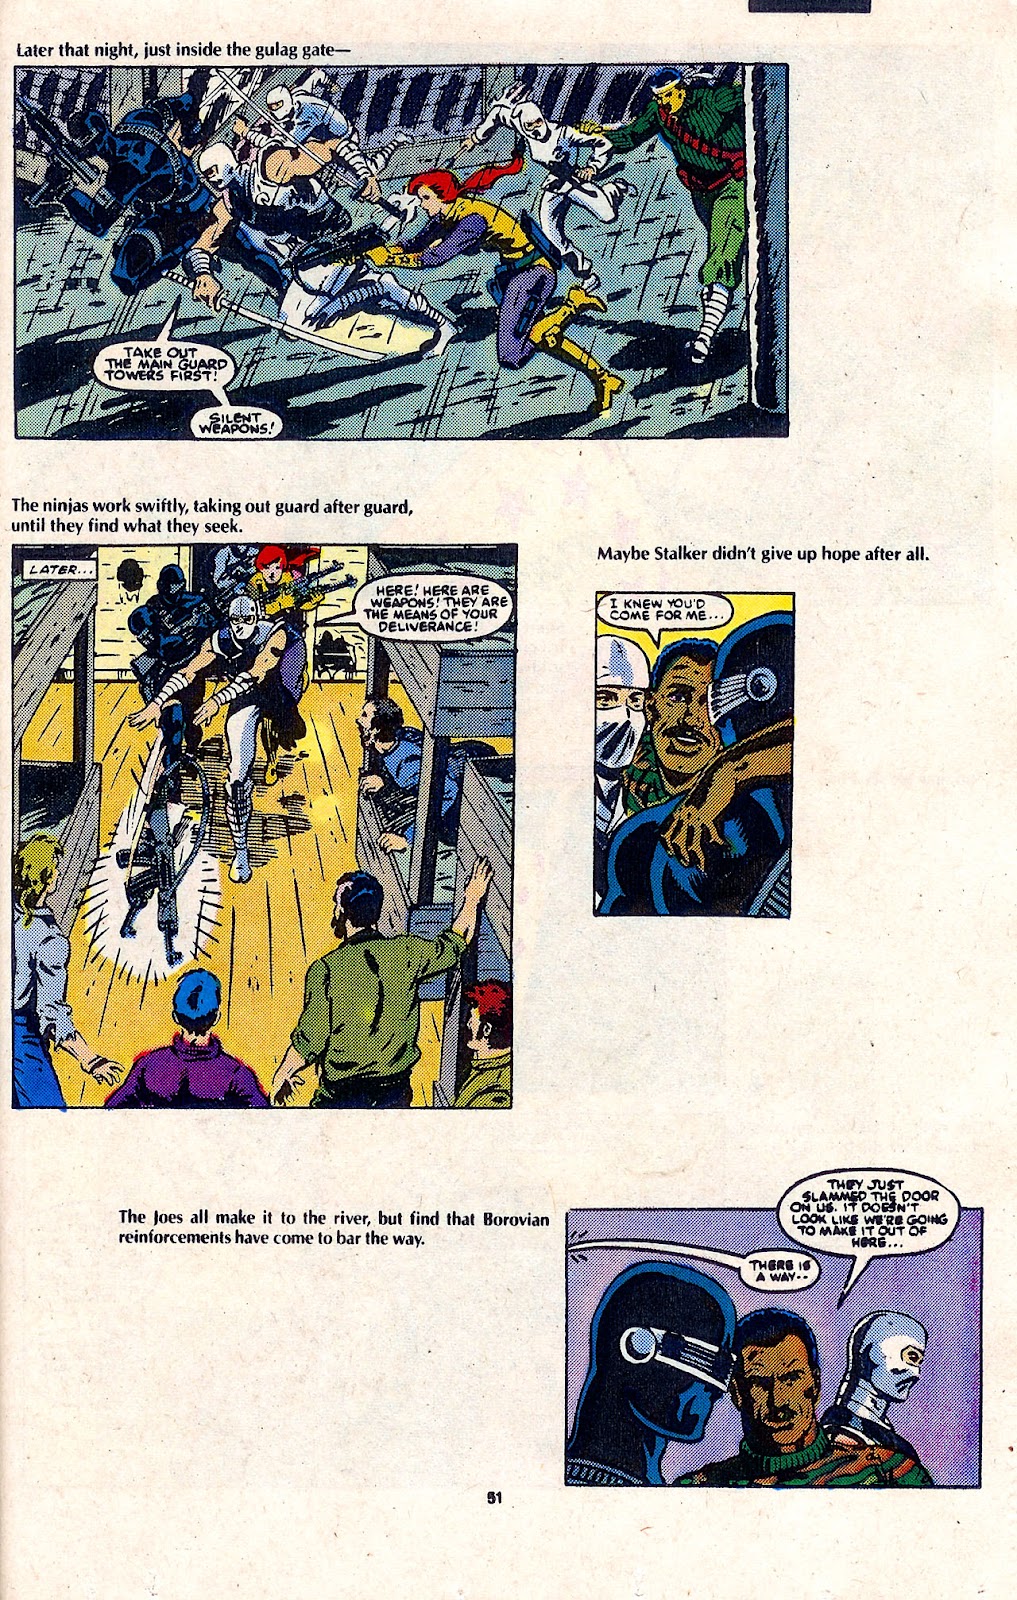 G.I. Joe Yearbook 004 | Read All Comics Online For Free